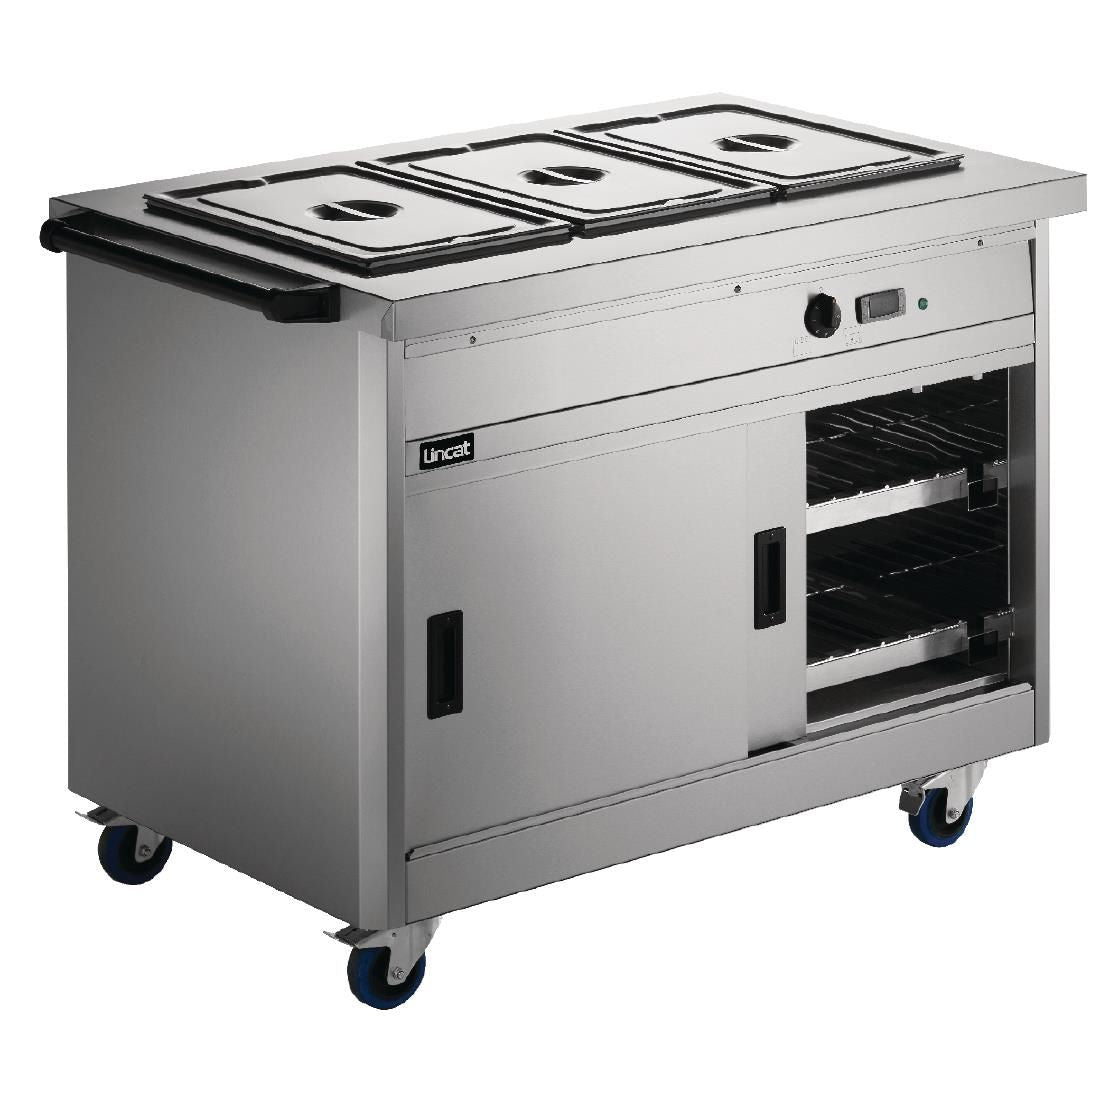 GF370 Lincat Panther Hot Cupboard and Bain Marie Top P8B3 JD Catering Equipment Solutions Ltd